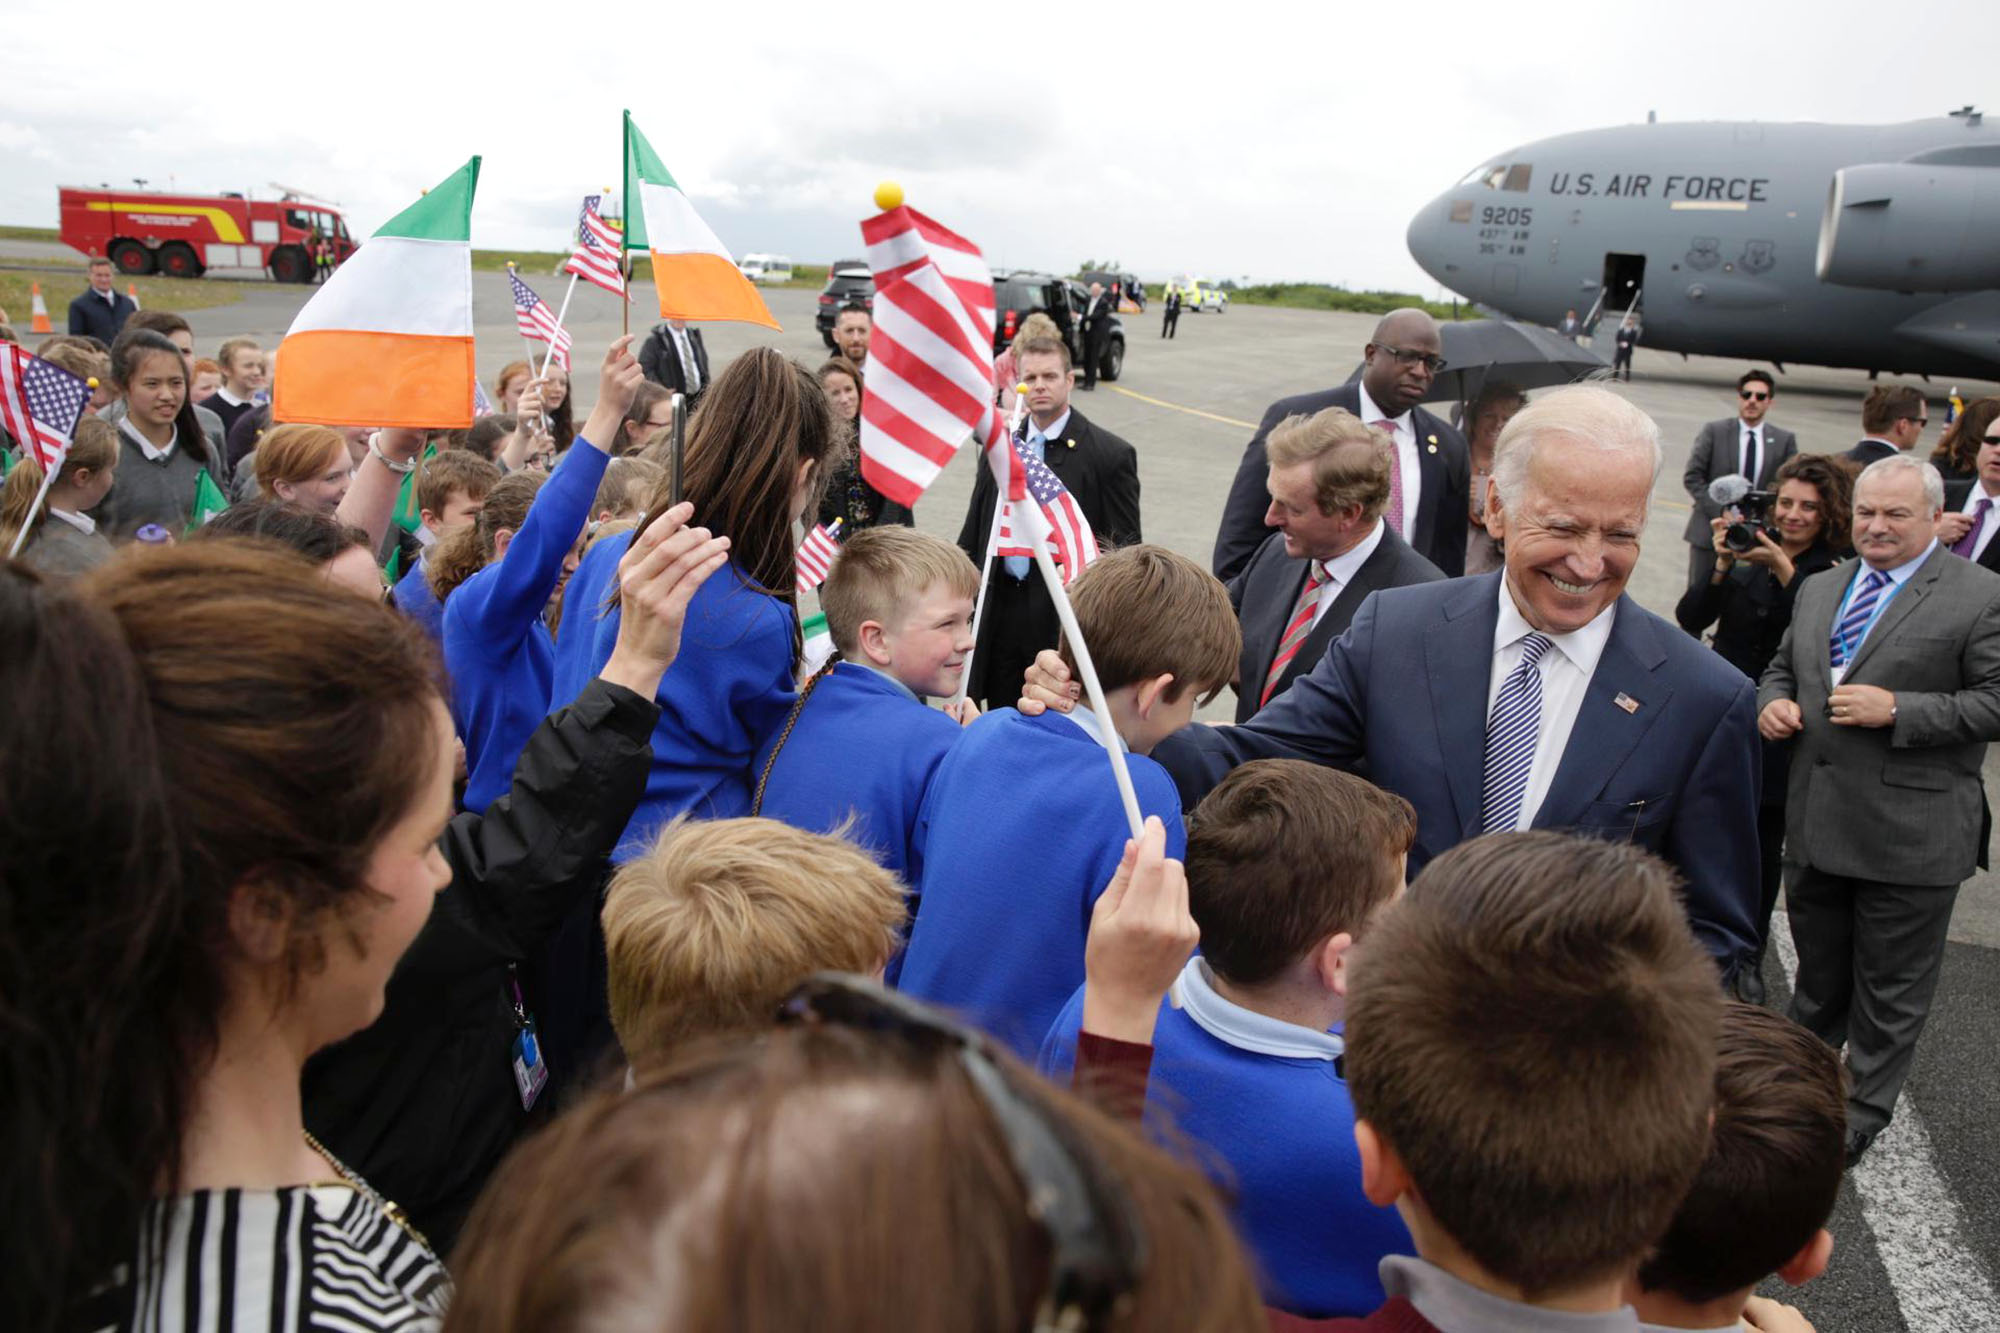 Vice President Joe Biden greets local students with Taoiseach Enda Kenny upon arrival at Ireland West Airport Knock in Charlestown, County Mayo, Ireland, June 22, 2016. (Official White House Photo by David Lienemann)